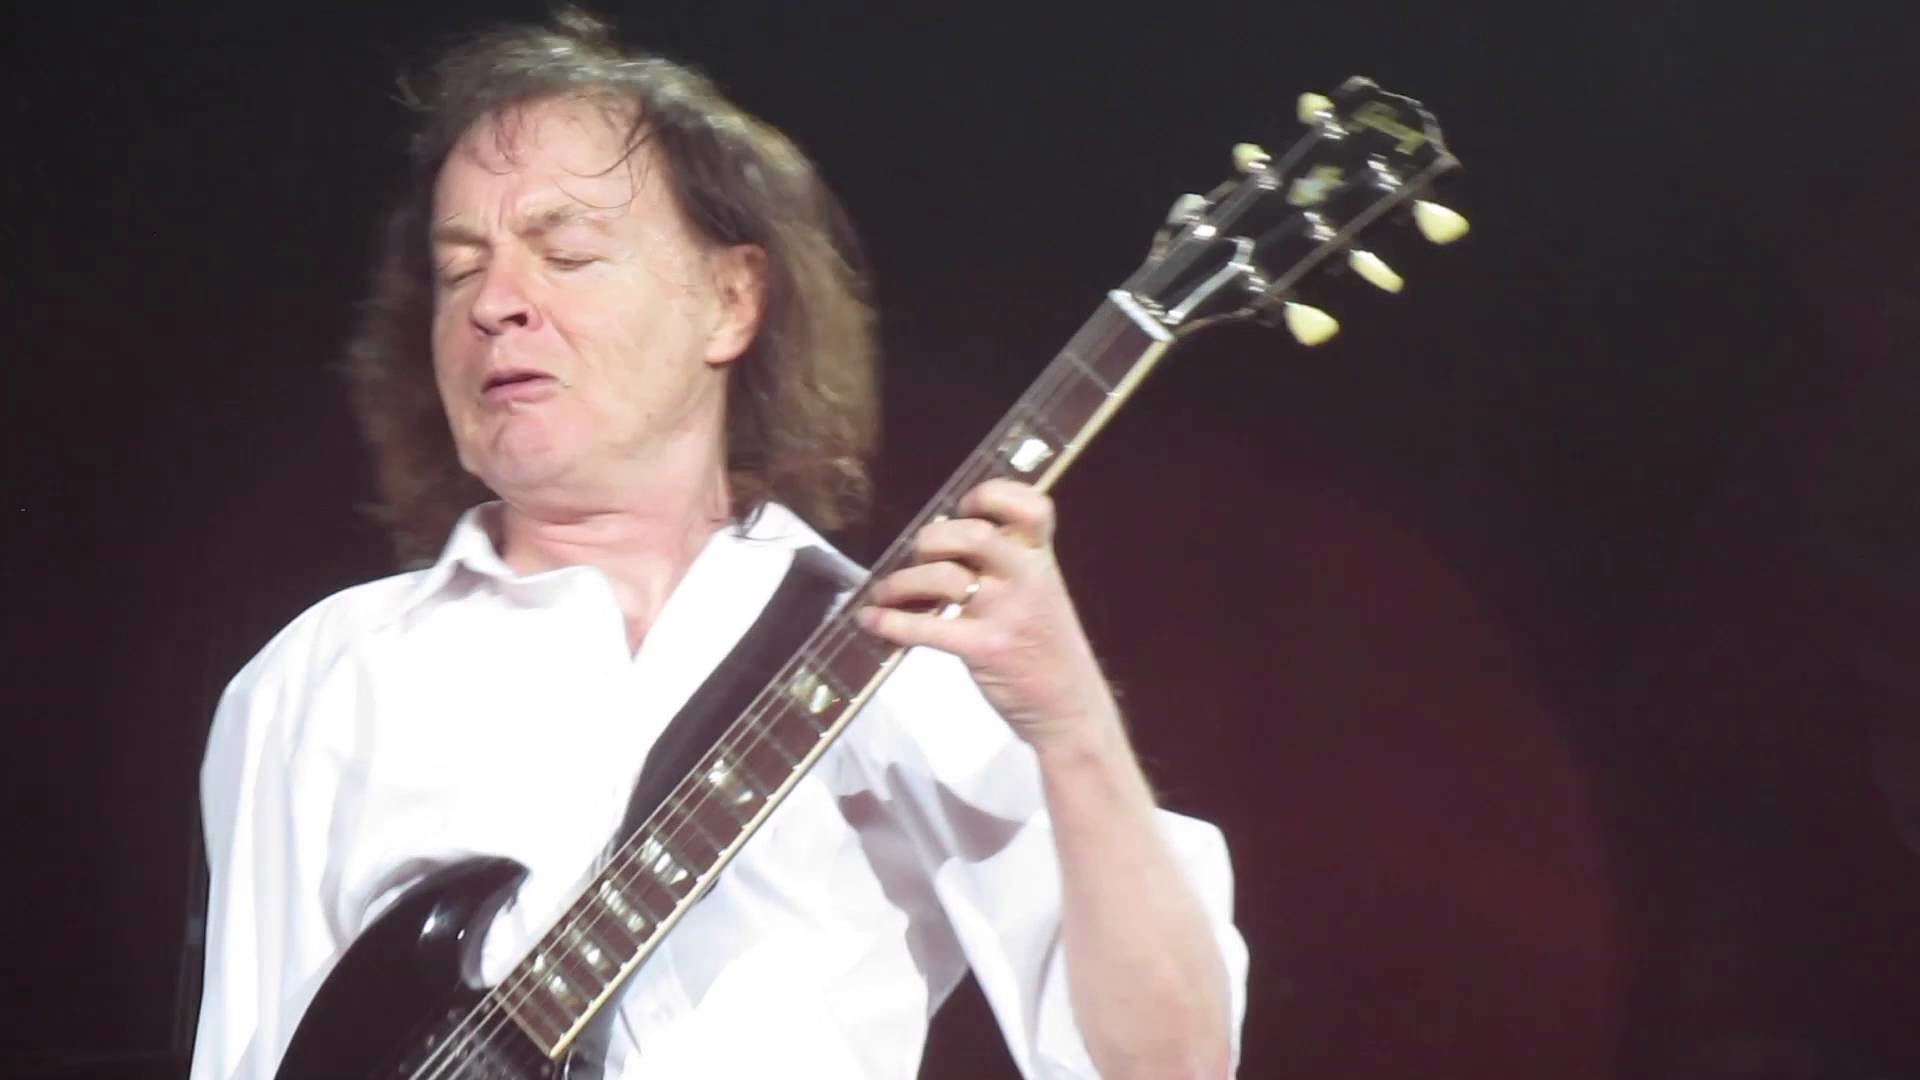 1920x1080 Angus Young - AC/DC Throwing Down In Denver LIVE 8FEB16